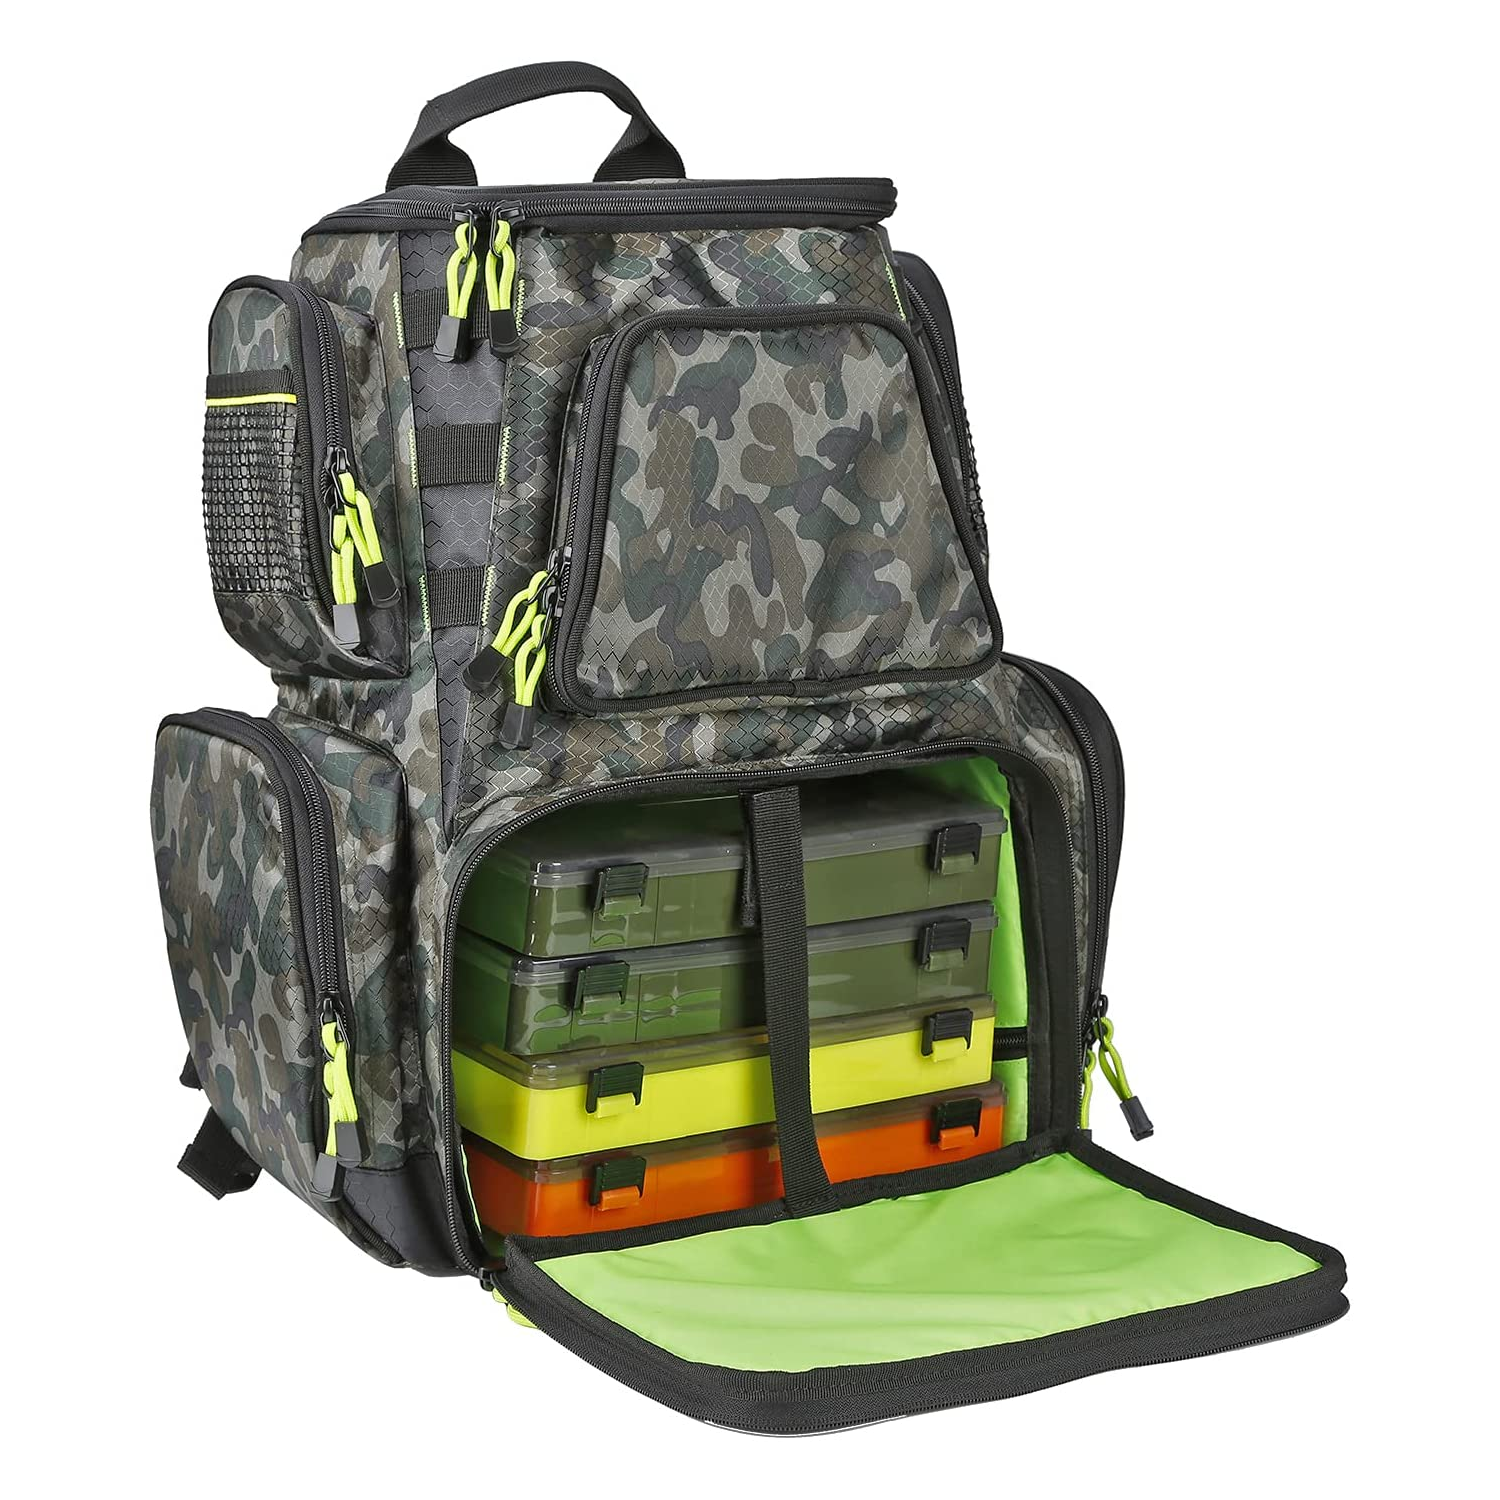 https://backpacks.global/compare/wp-content/uploads/SeaKnight-Fishing-Tackle-Backpack-Front-View.png